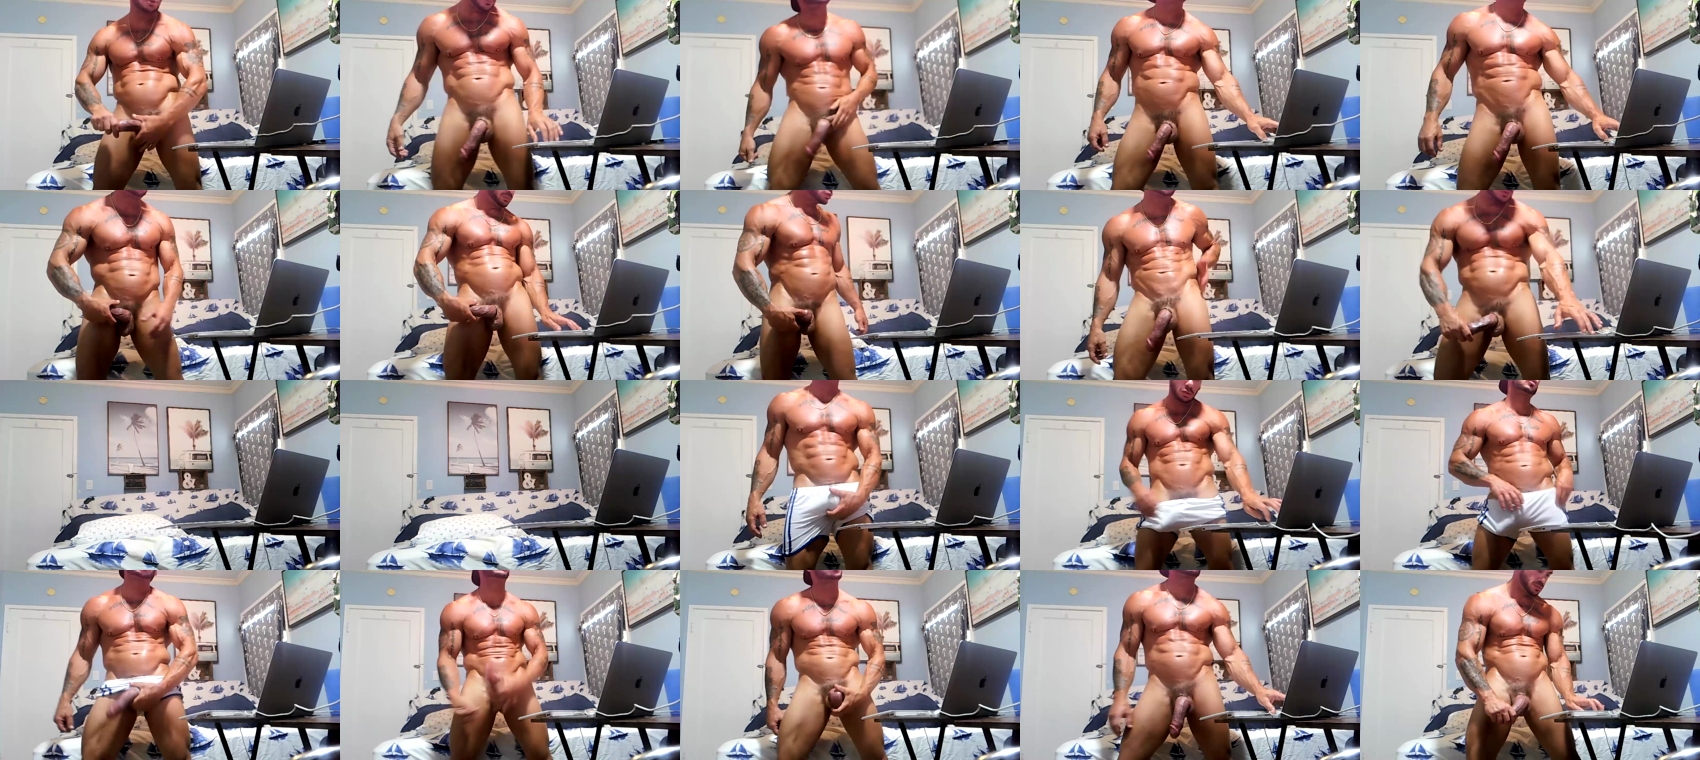 marcoducati toy Webcam SHOW @ Chaturbate 06-07-2023